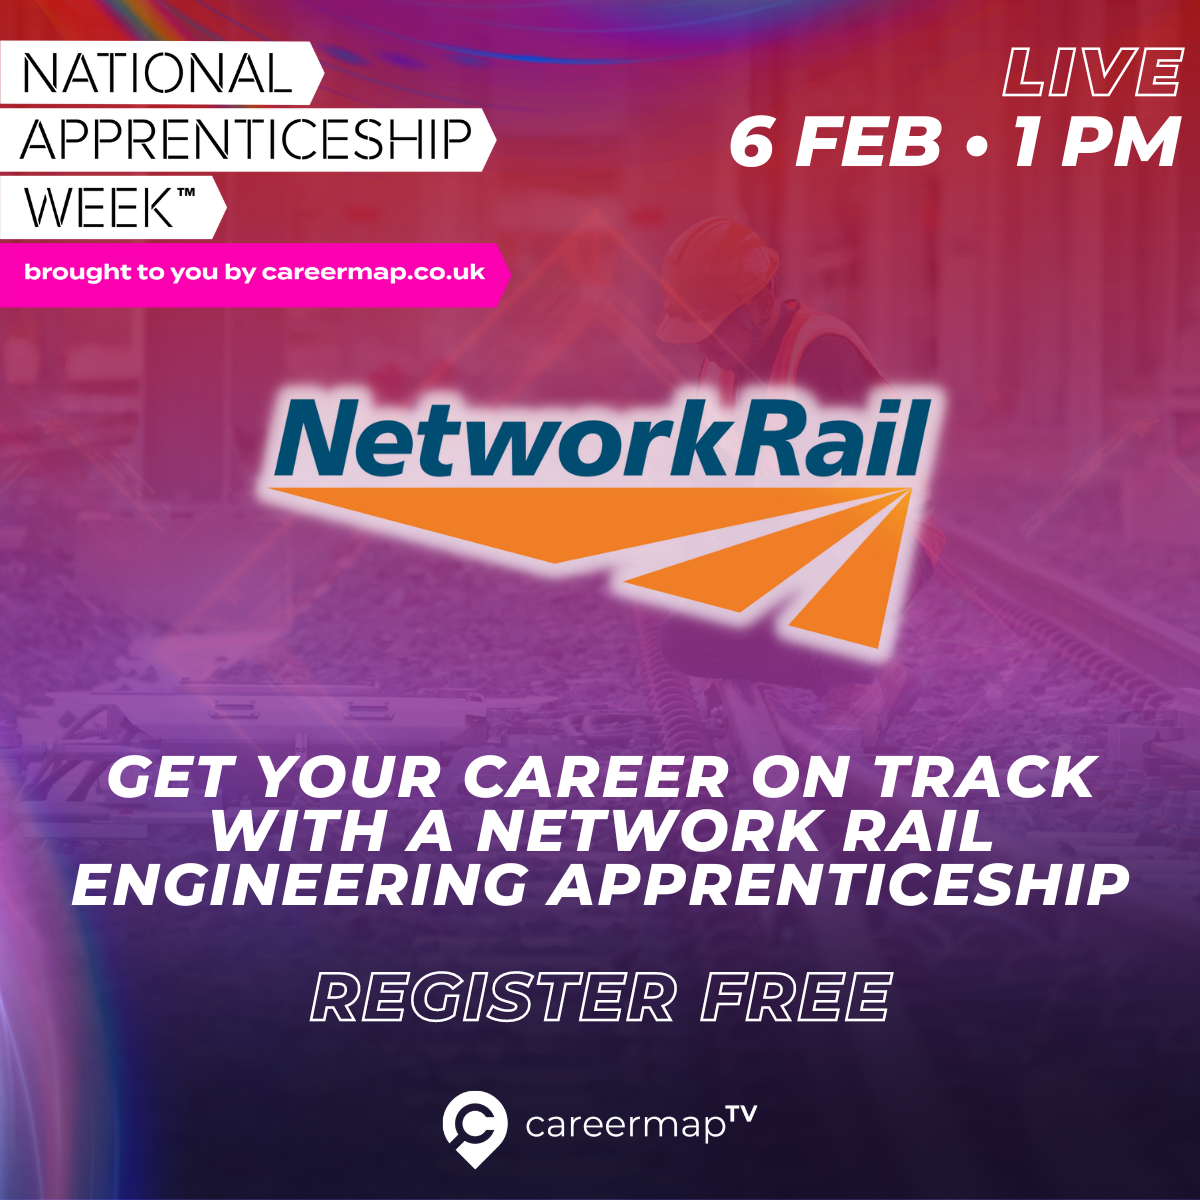 Get Your Career on Track With a Network Rail Engineering Apprenticeship